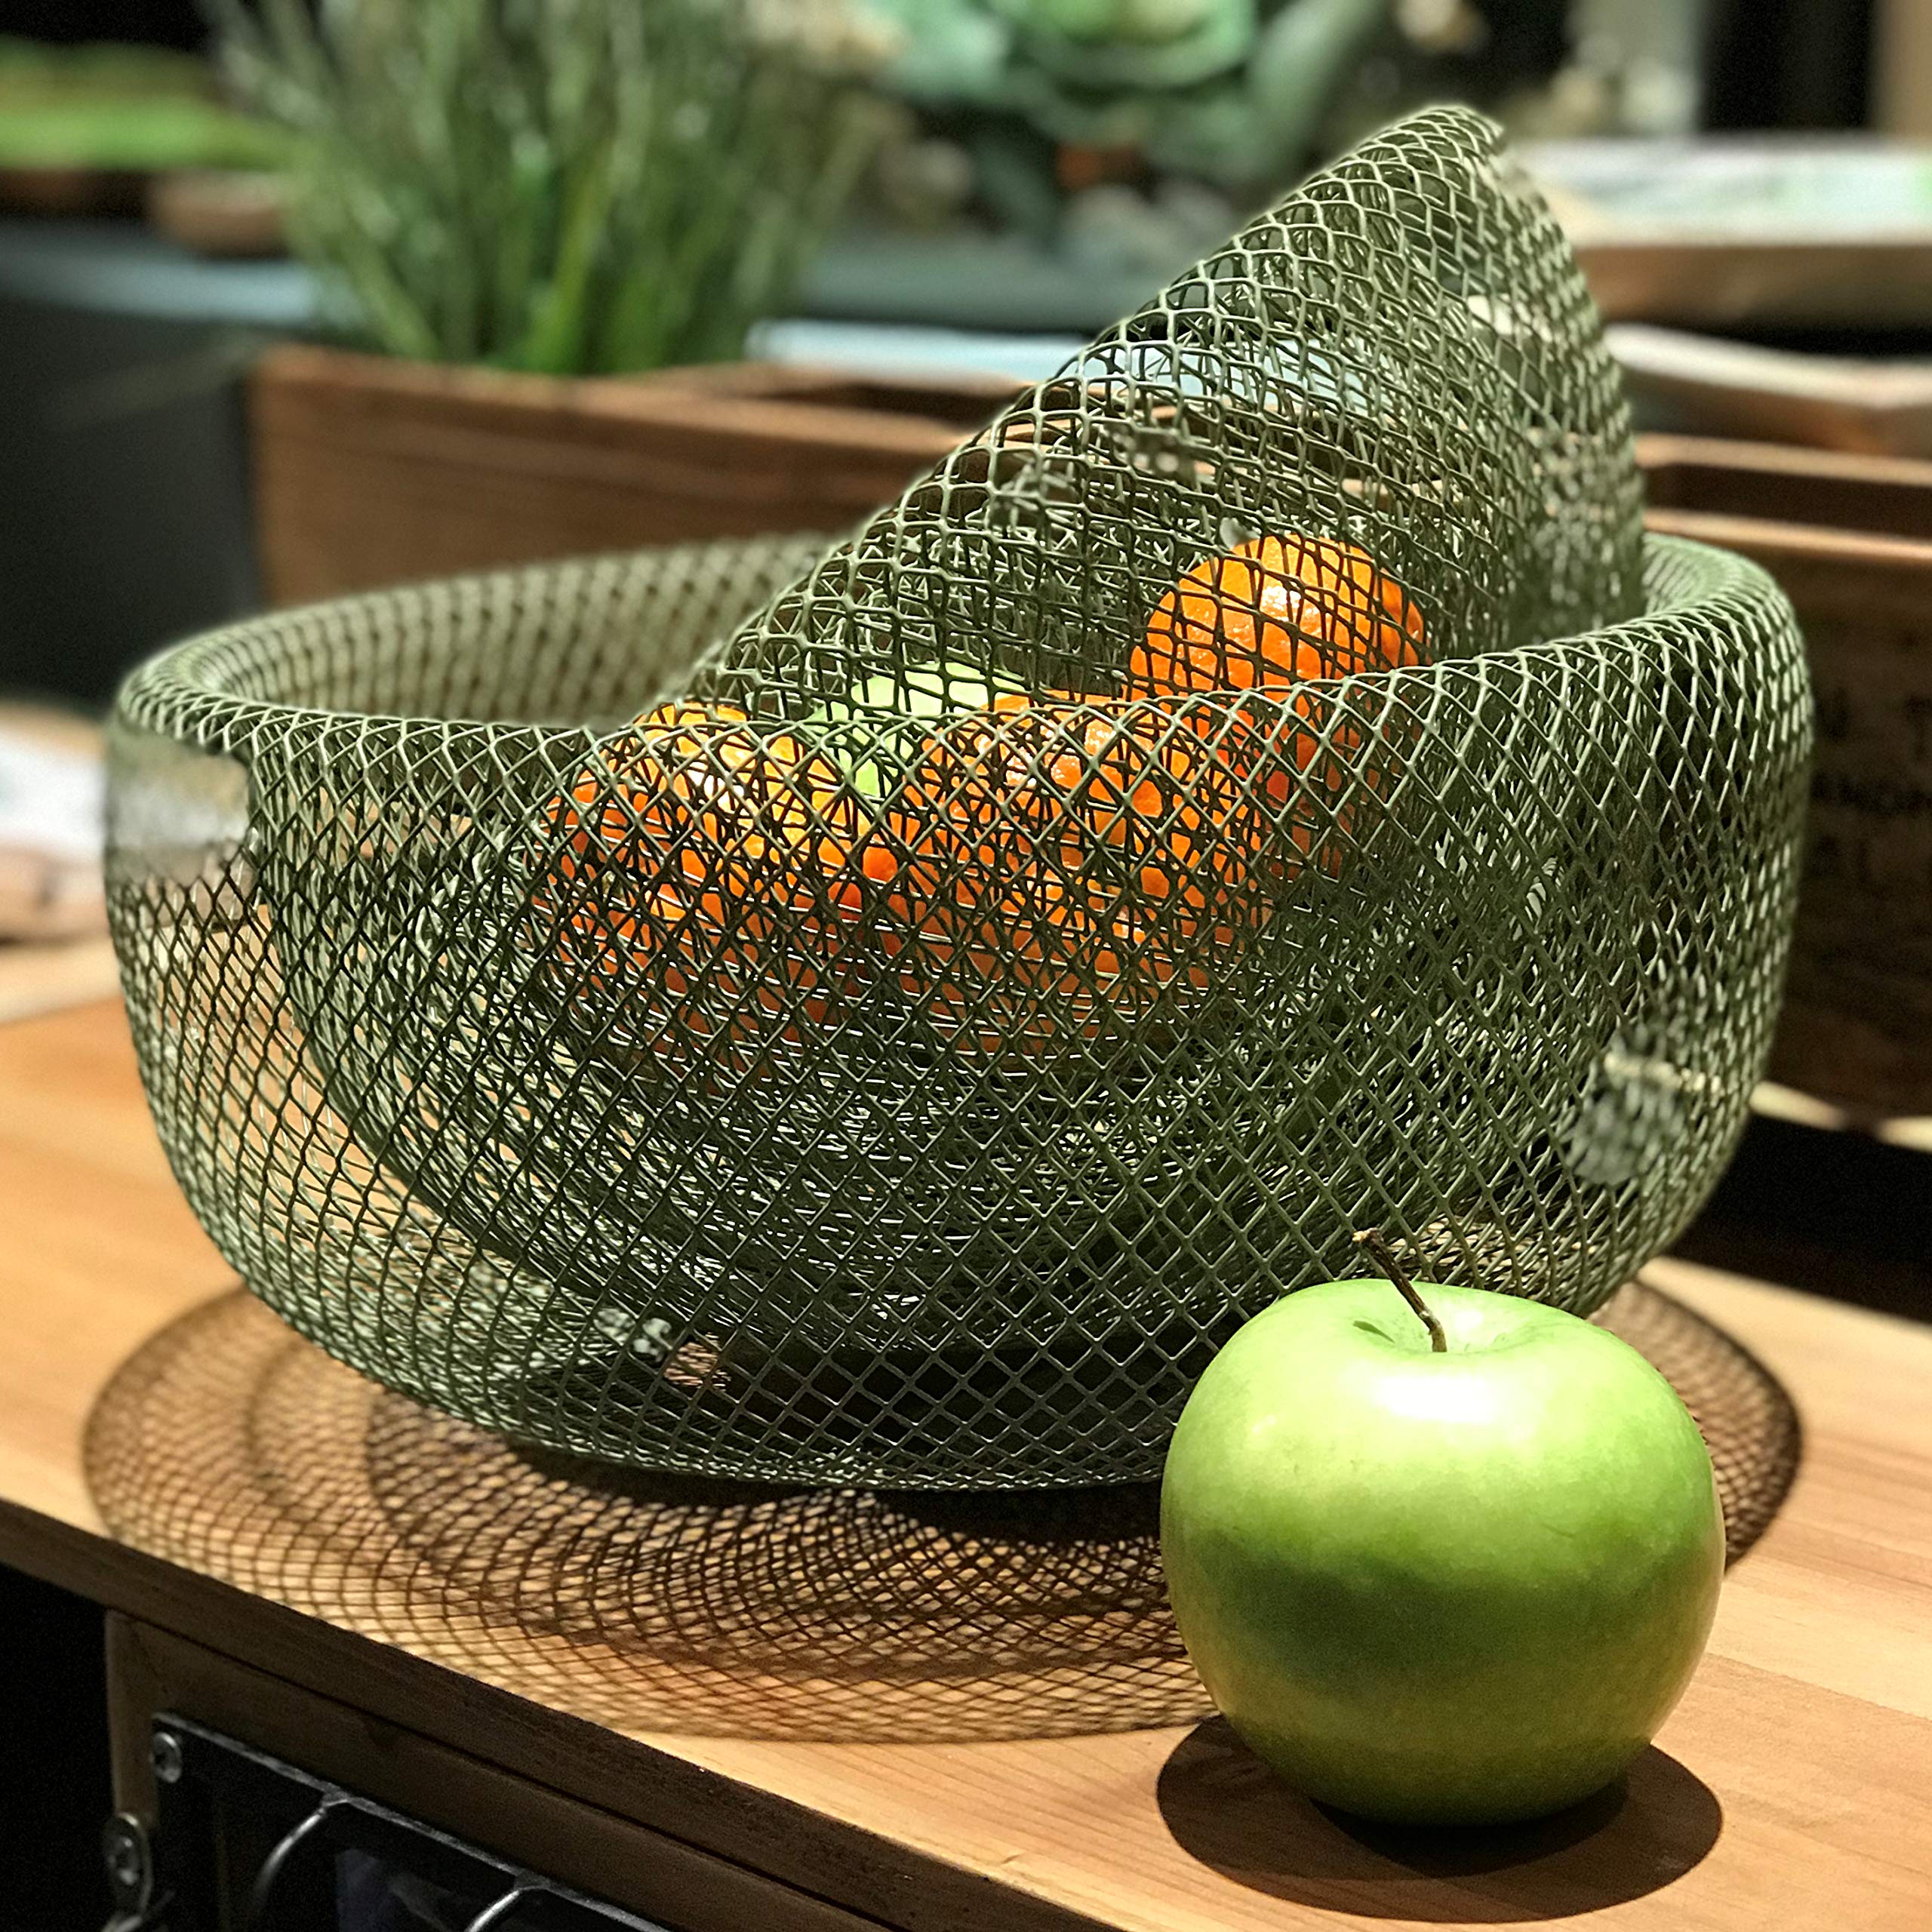 WHW Whole House Worlds Iconic Modern Wire Mesh Fruit Bowls, Olive Green, Set of 2, Art Museum Style, Iron, Large, 11.5 Inches Diameter x 6 Tall, and 9.5 Diameter x 4.75 Inches